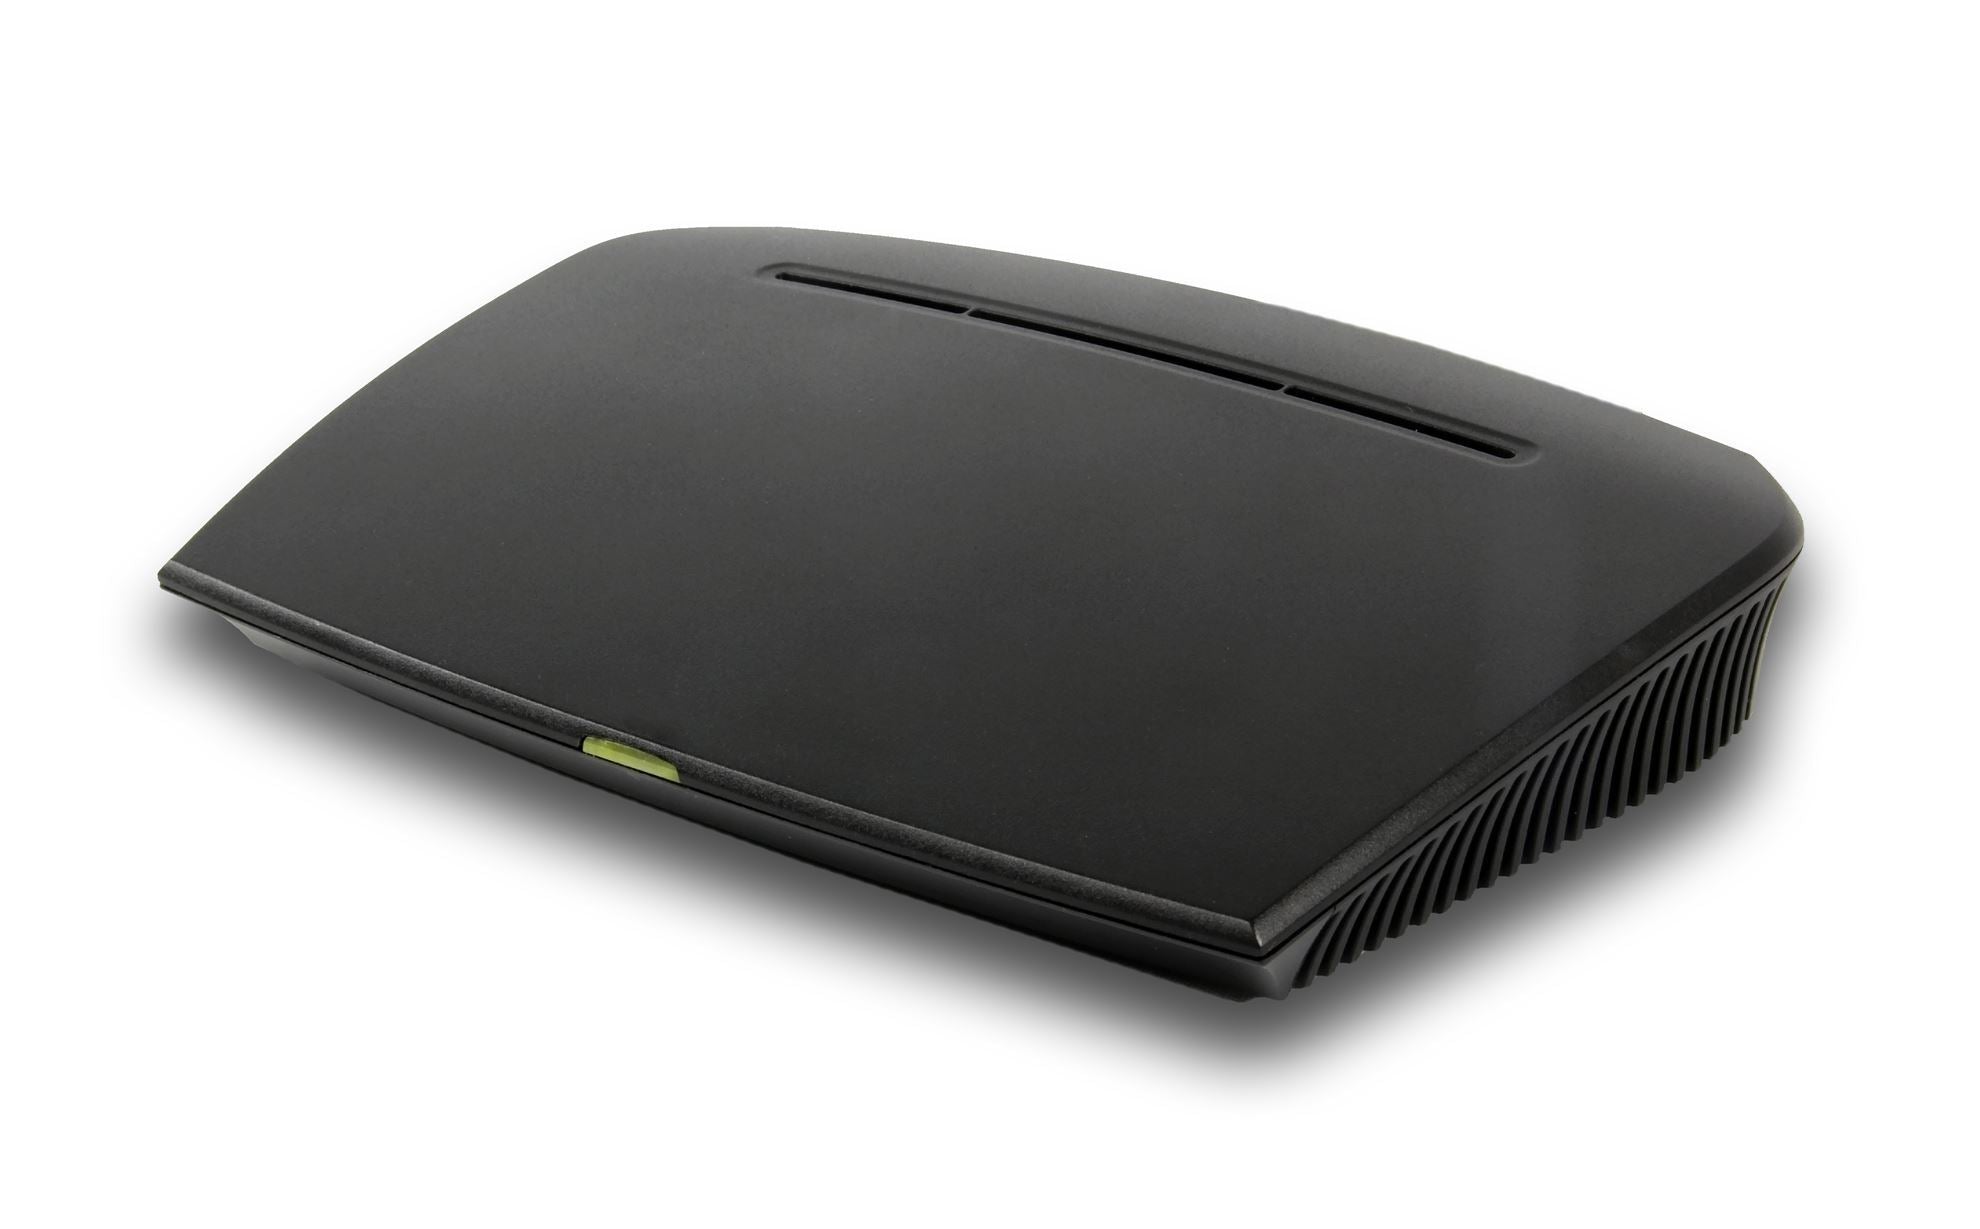 KONFTEL_IP_DECT_10_Base_Station._Supports_HD_Calls_&_Connects_to_a_SIP-based_Exchange_or_Phone_Service._Connects_up_to_20x_300Wx_Devices._Up_to_5_Simultaneous_Calls._50m_Indoor_range.